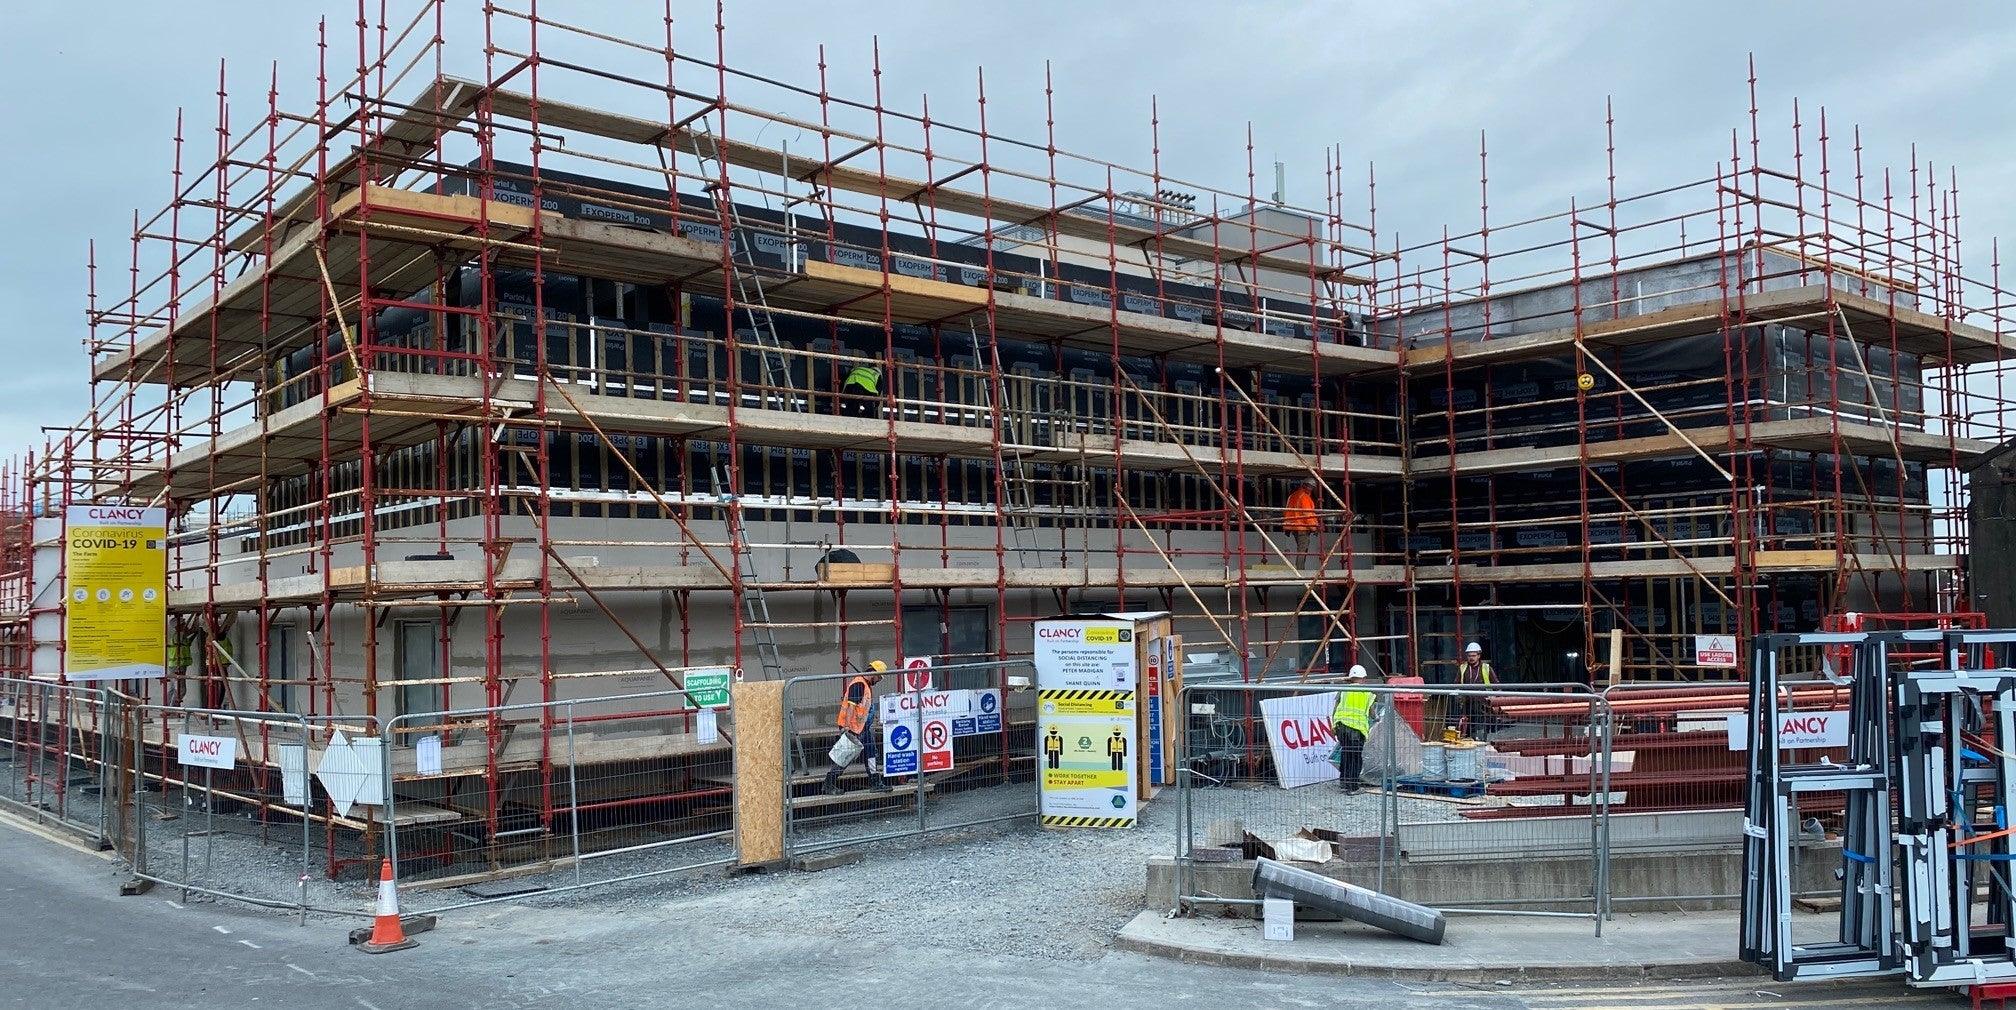 EXOPERM™ MONO DURO 200 Fire-Rated Membrane Contributes to the Extension of University Hospital Limerick, as part of Covid-19 efforts